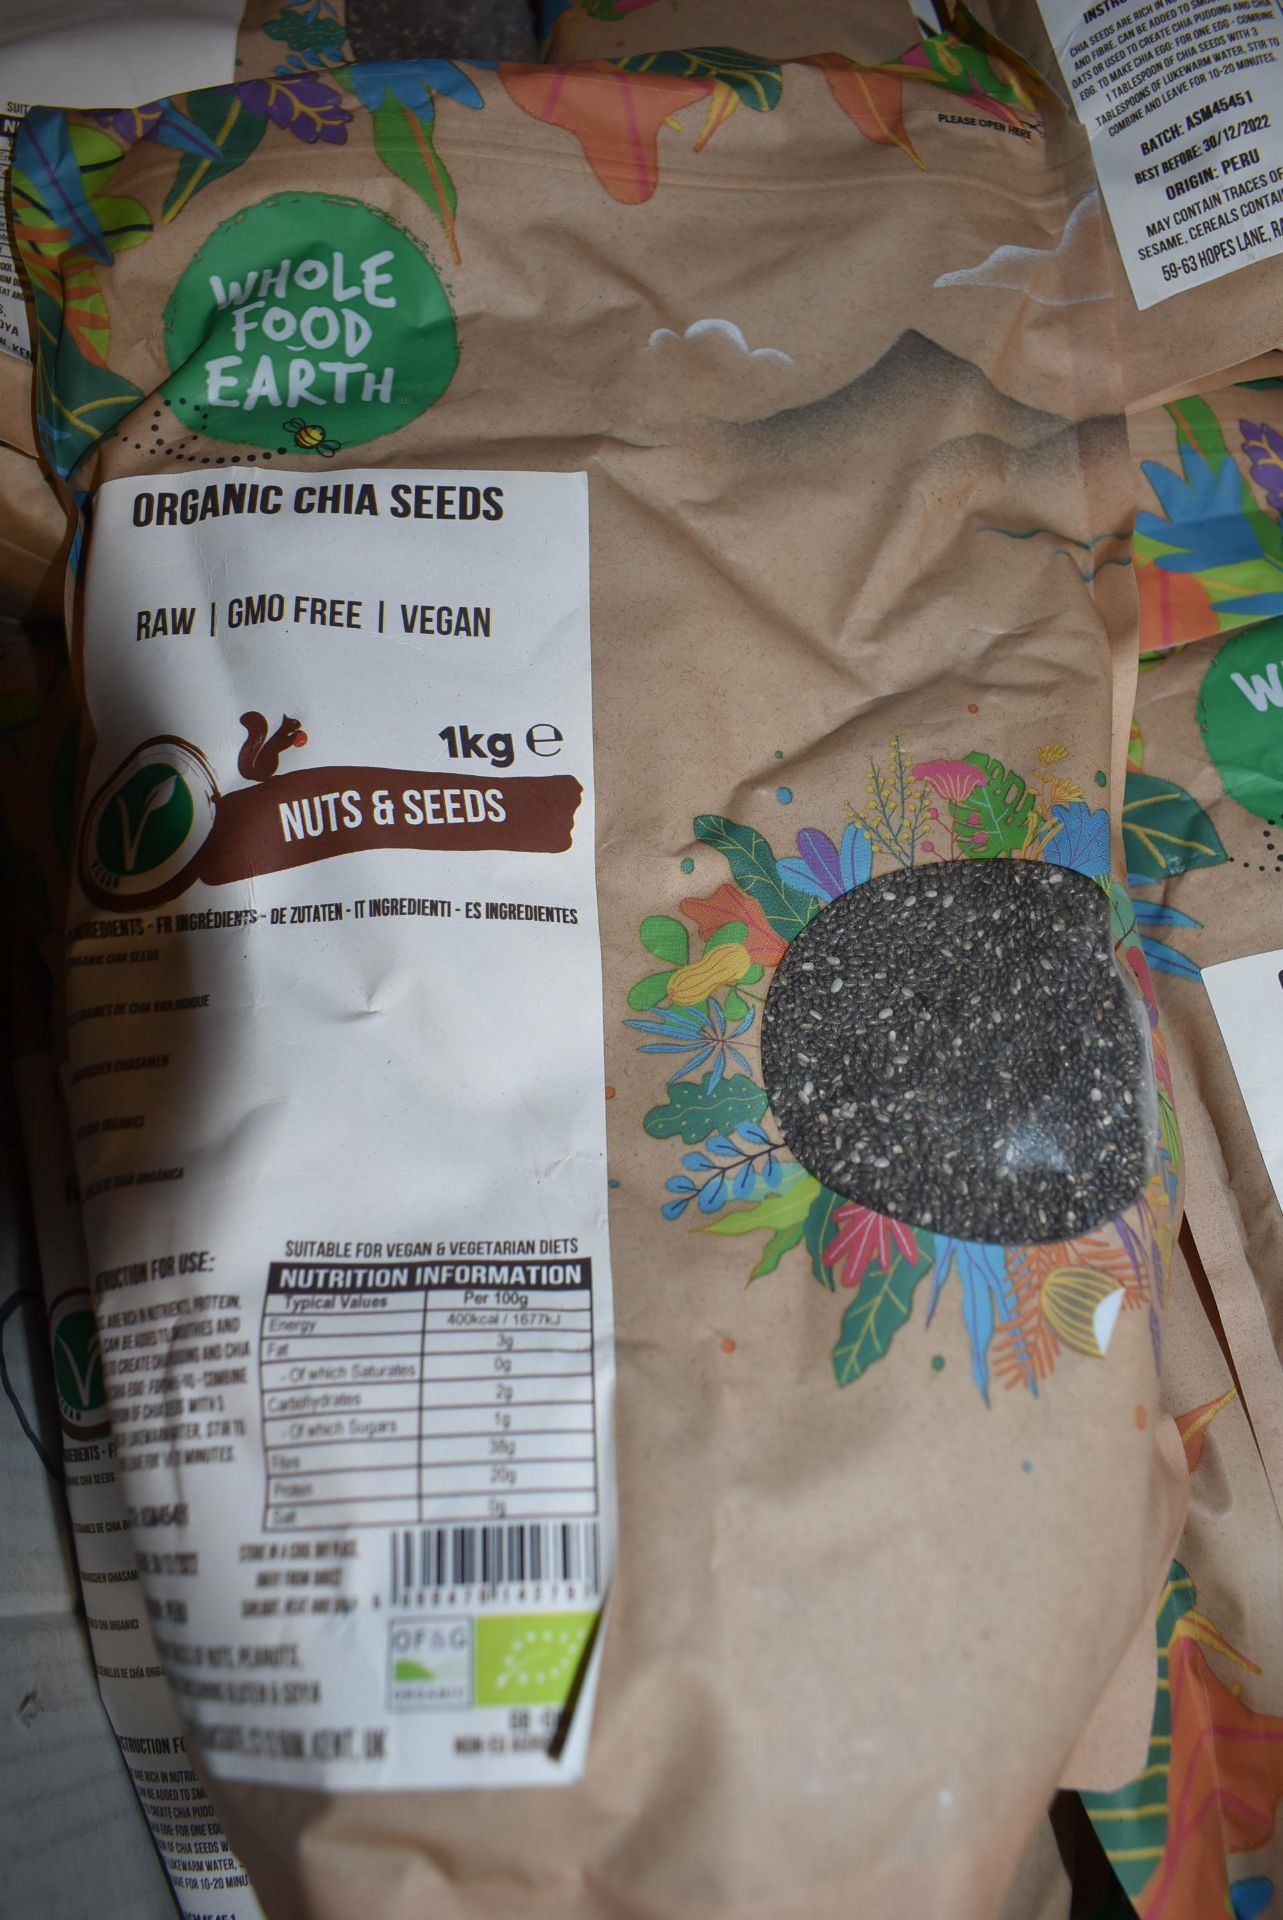 *Box of Whole Food Earth Organic Chia Seed (past BBD) - Image 2 of 2